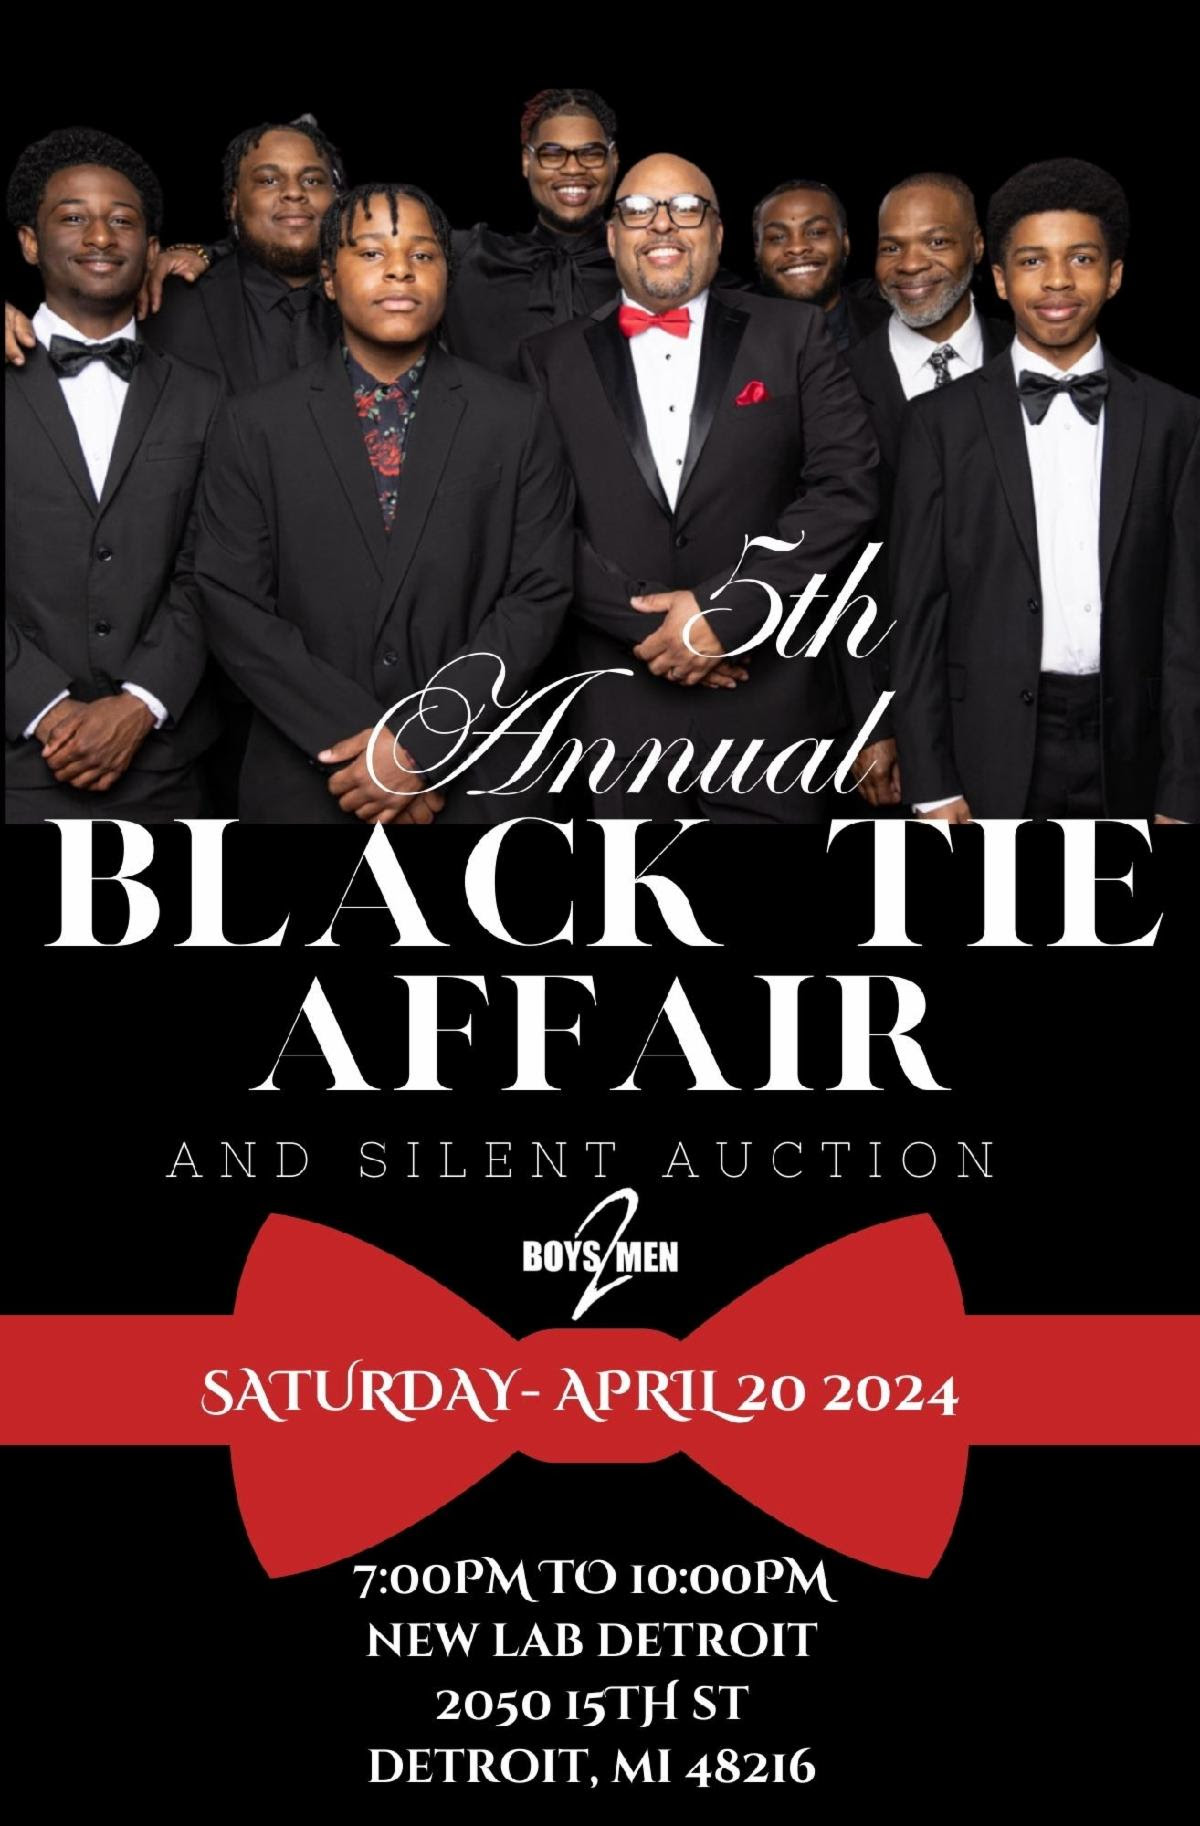 5th Annual Black Tie Affair Event Flyer with background of men in tuxedos